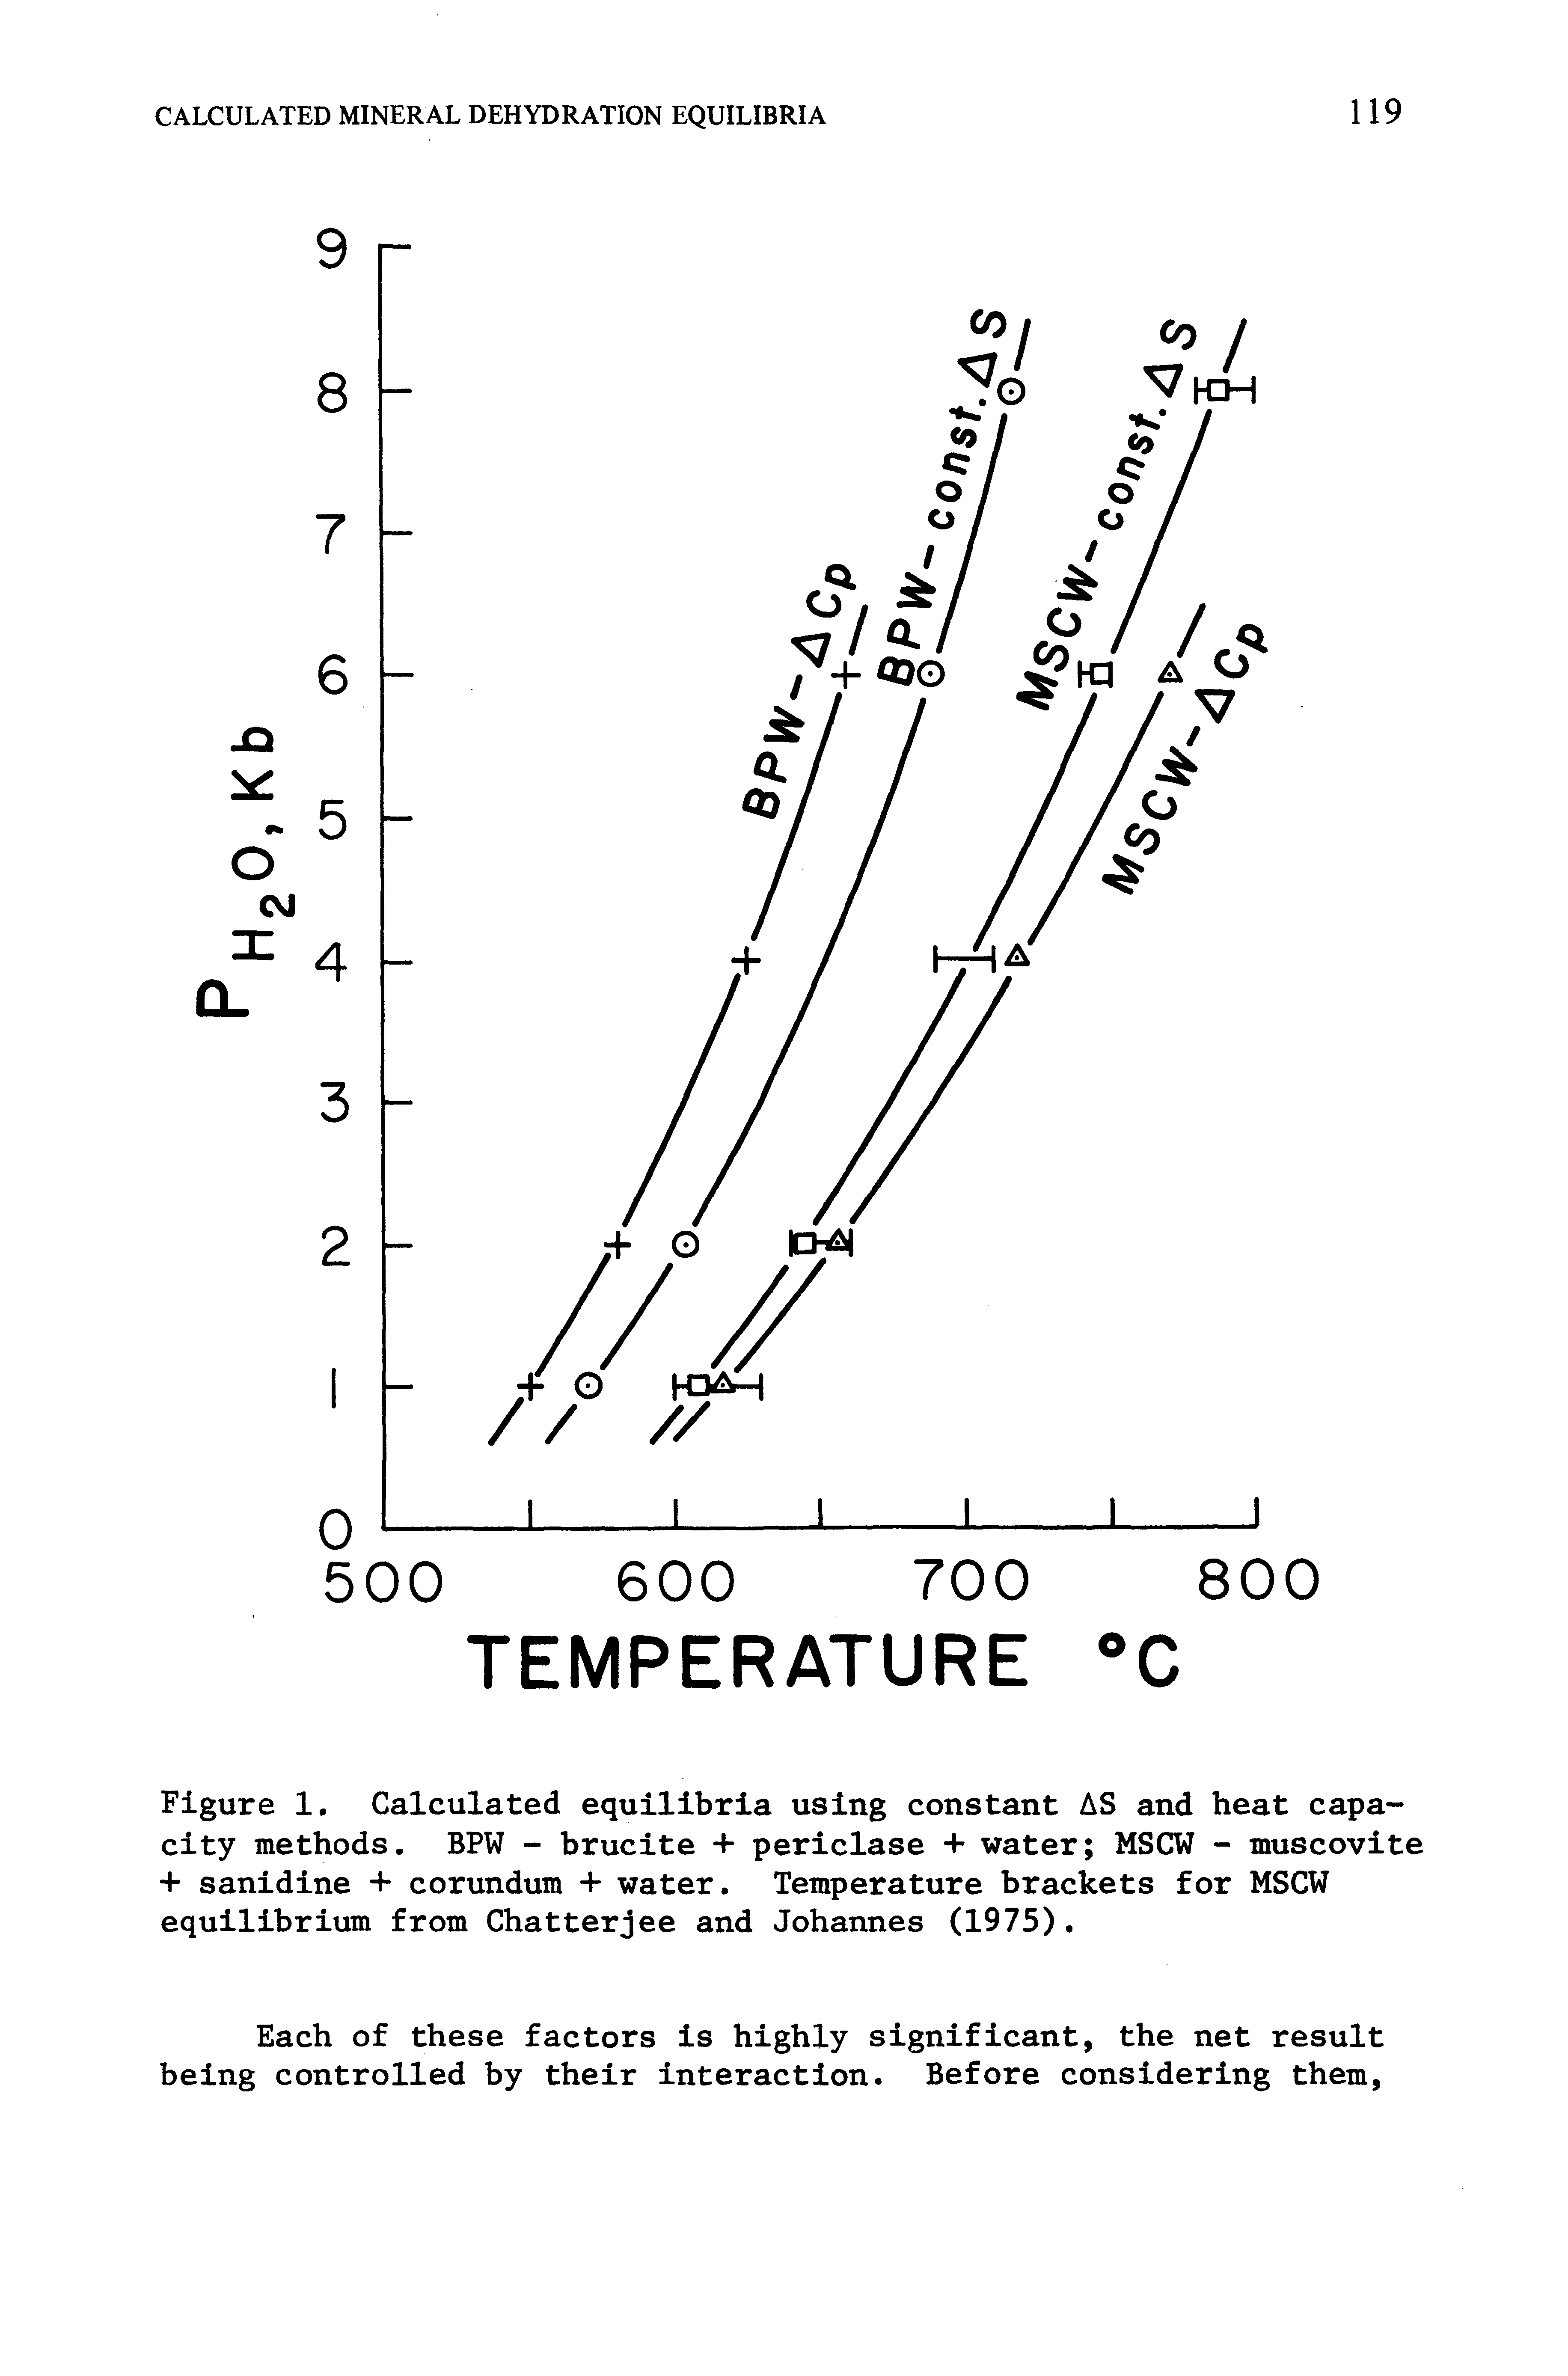 Figure Calculated equilibria using constant AS and heat capacity methods. BPW - brucite + periclase + water MSCW - muscovite + sanidine + corundum + water. Temperature brackets for MSCW equilibrium from Chatterjee and Johannes (1975).